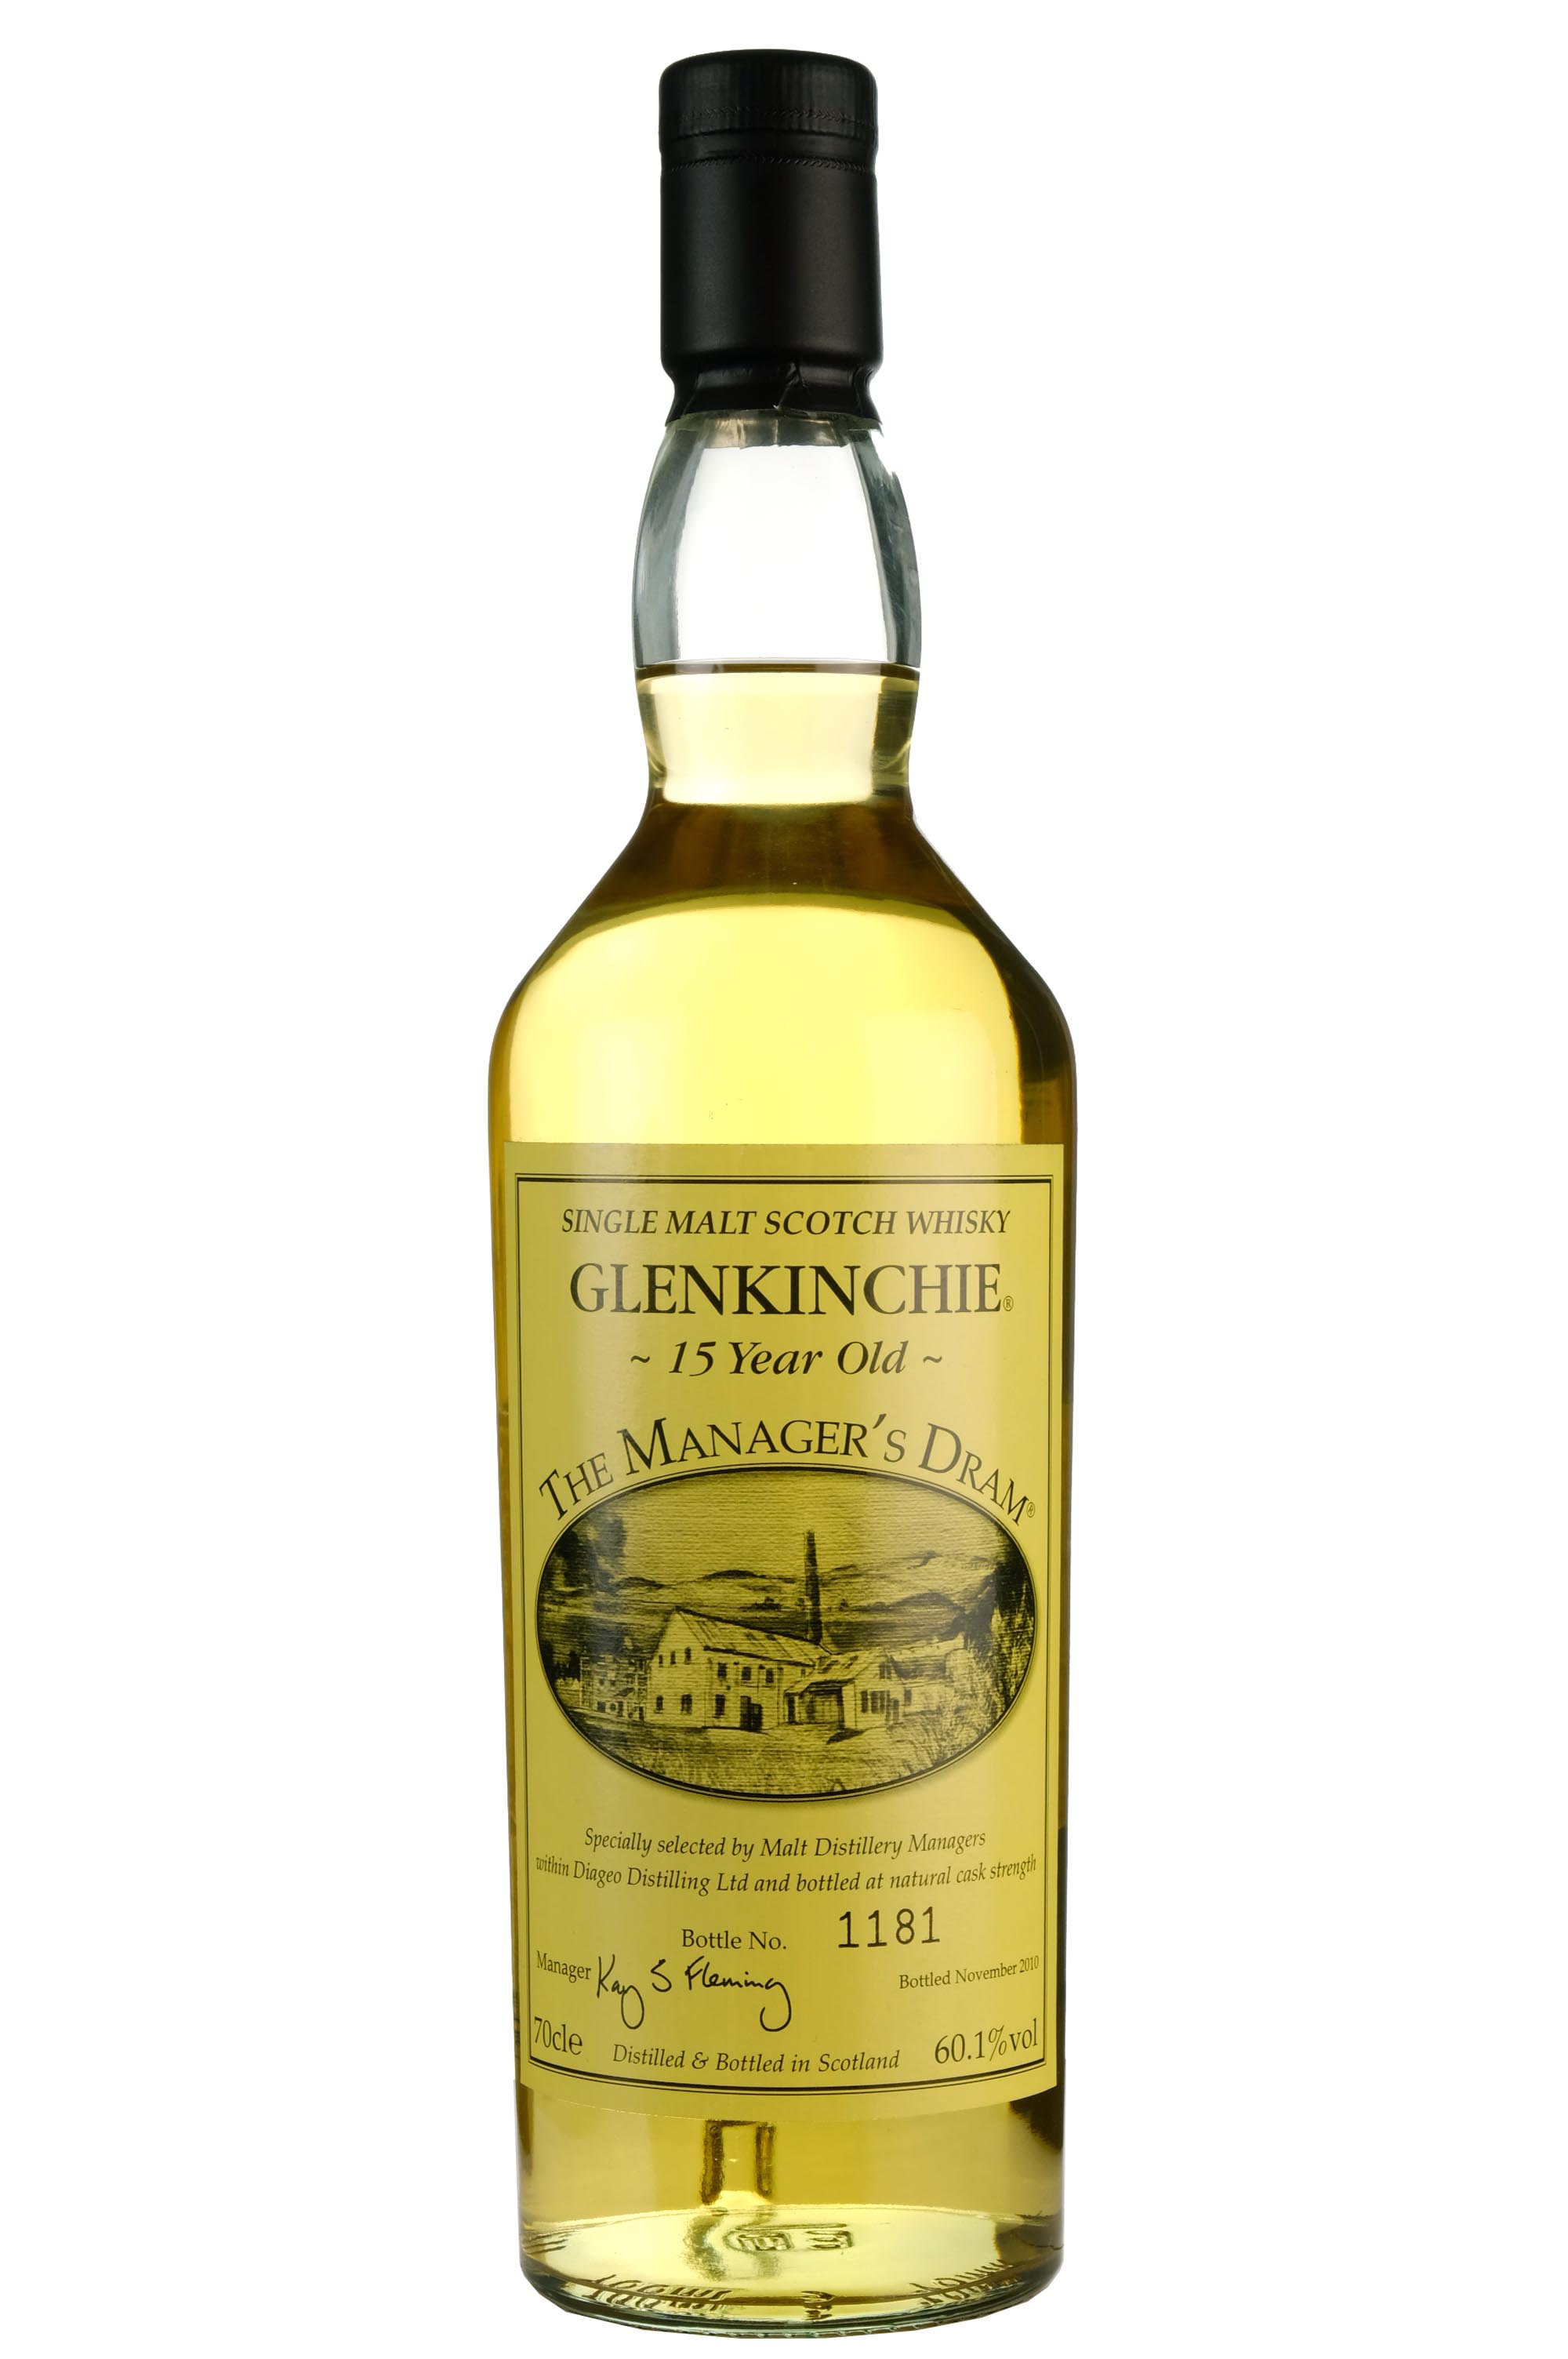 Glenkinchie 15 Year Old The Manager's Dram | 2010 Release